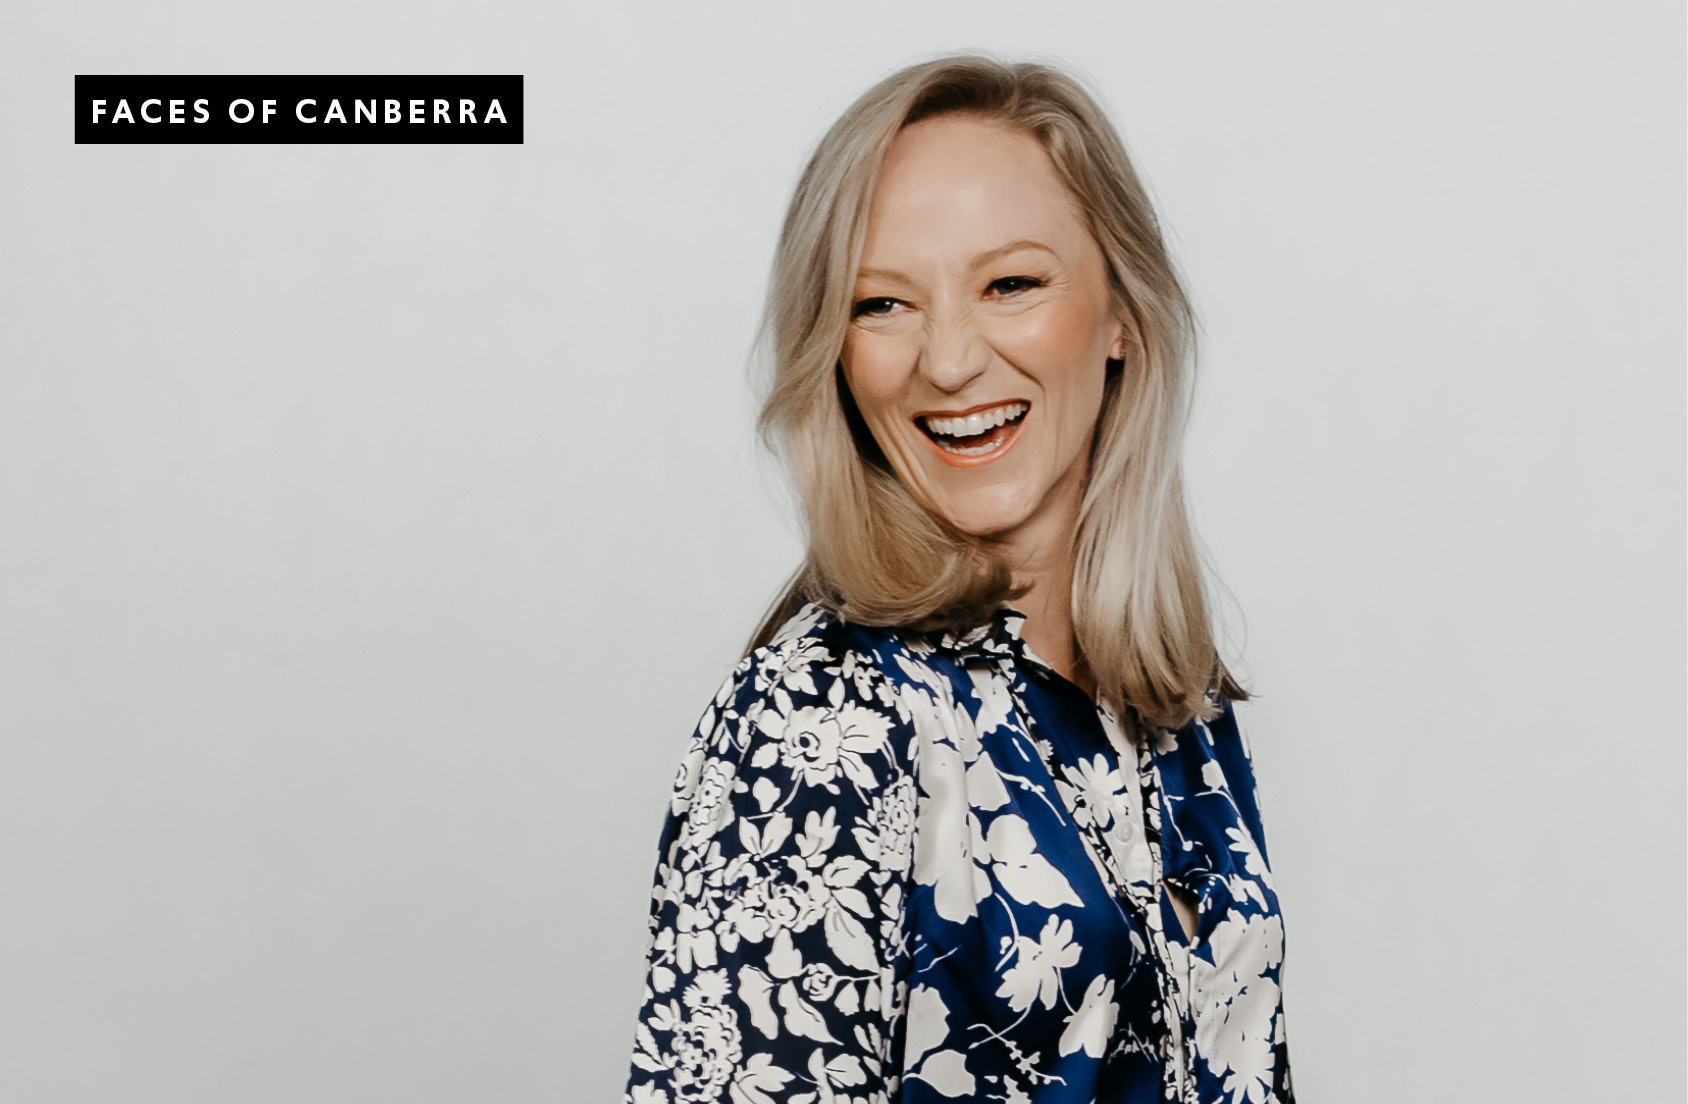 Danielle Harmer one of our faces of Canberra